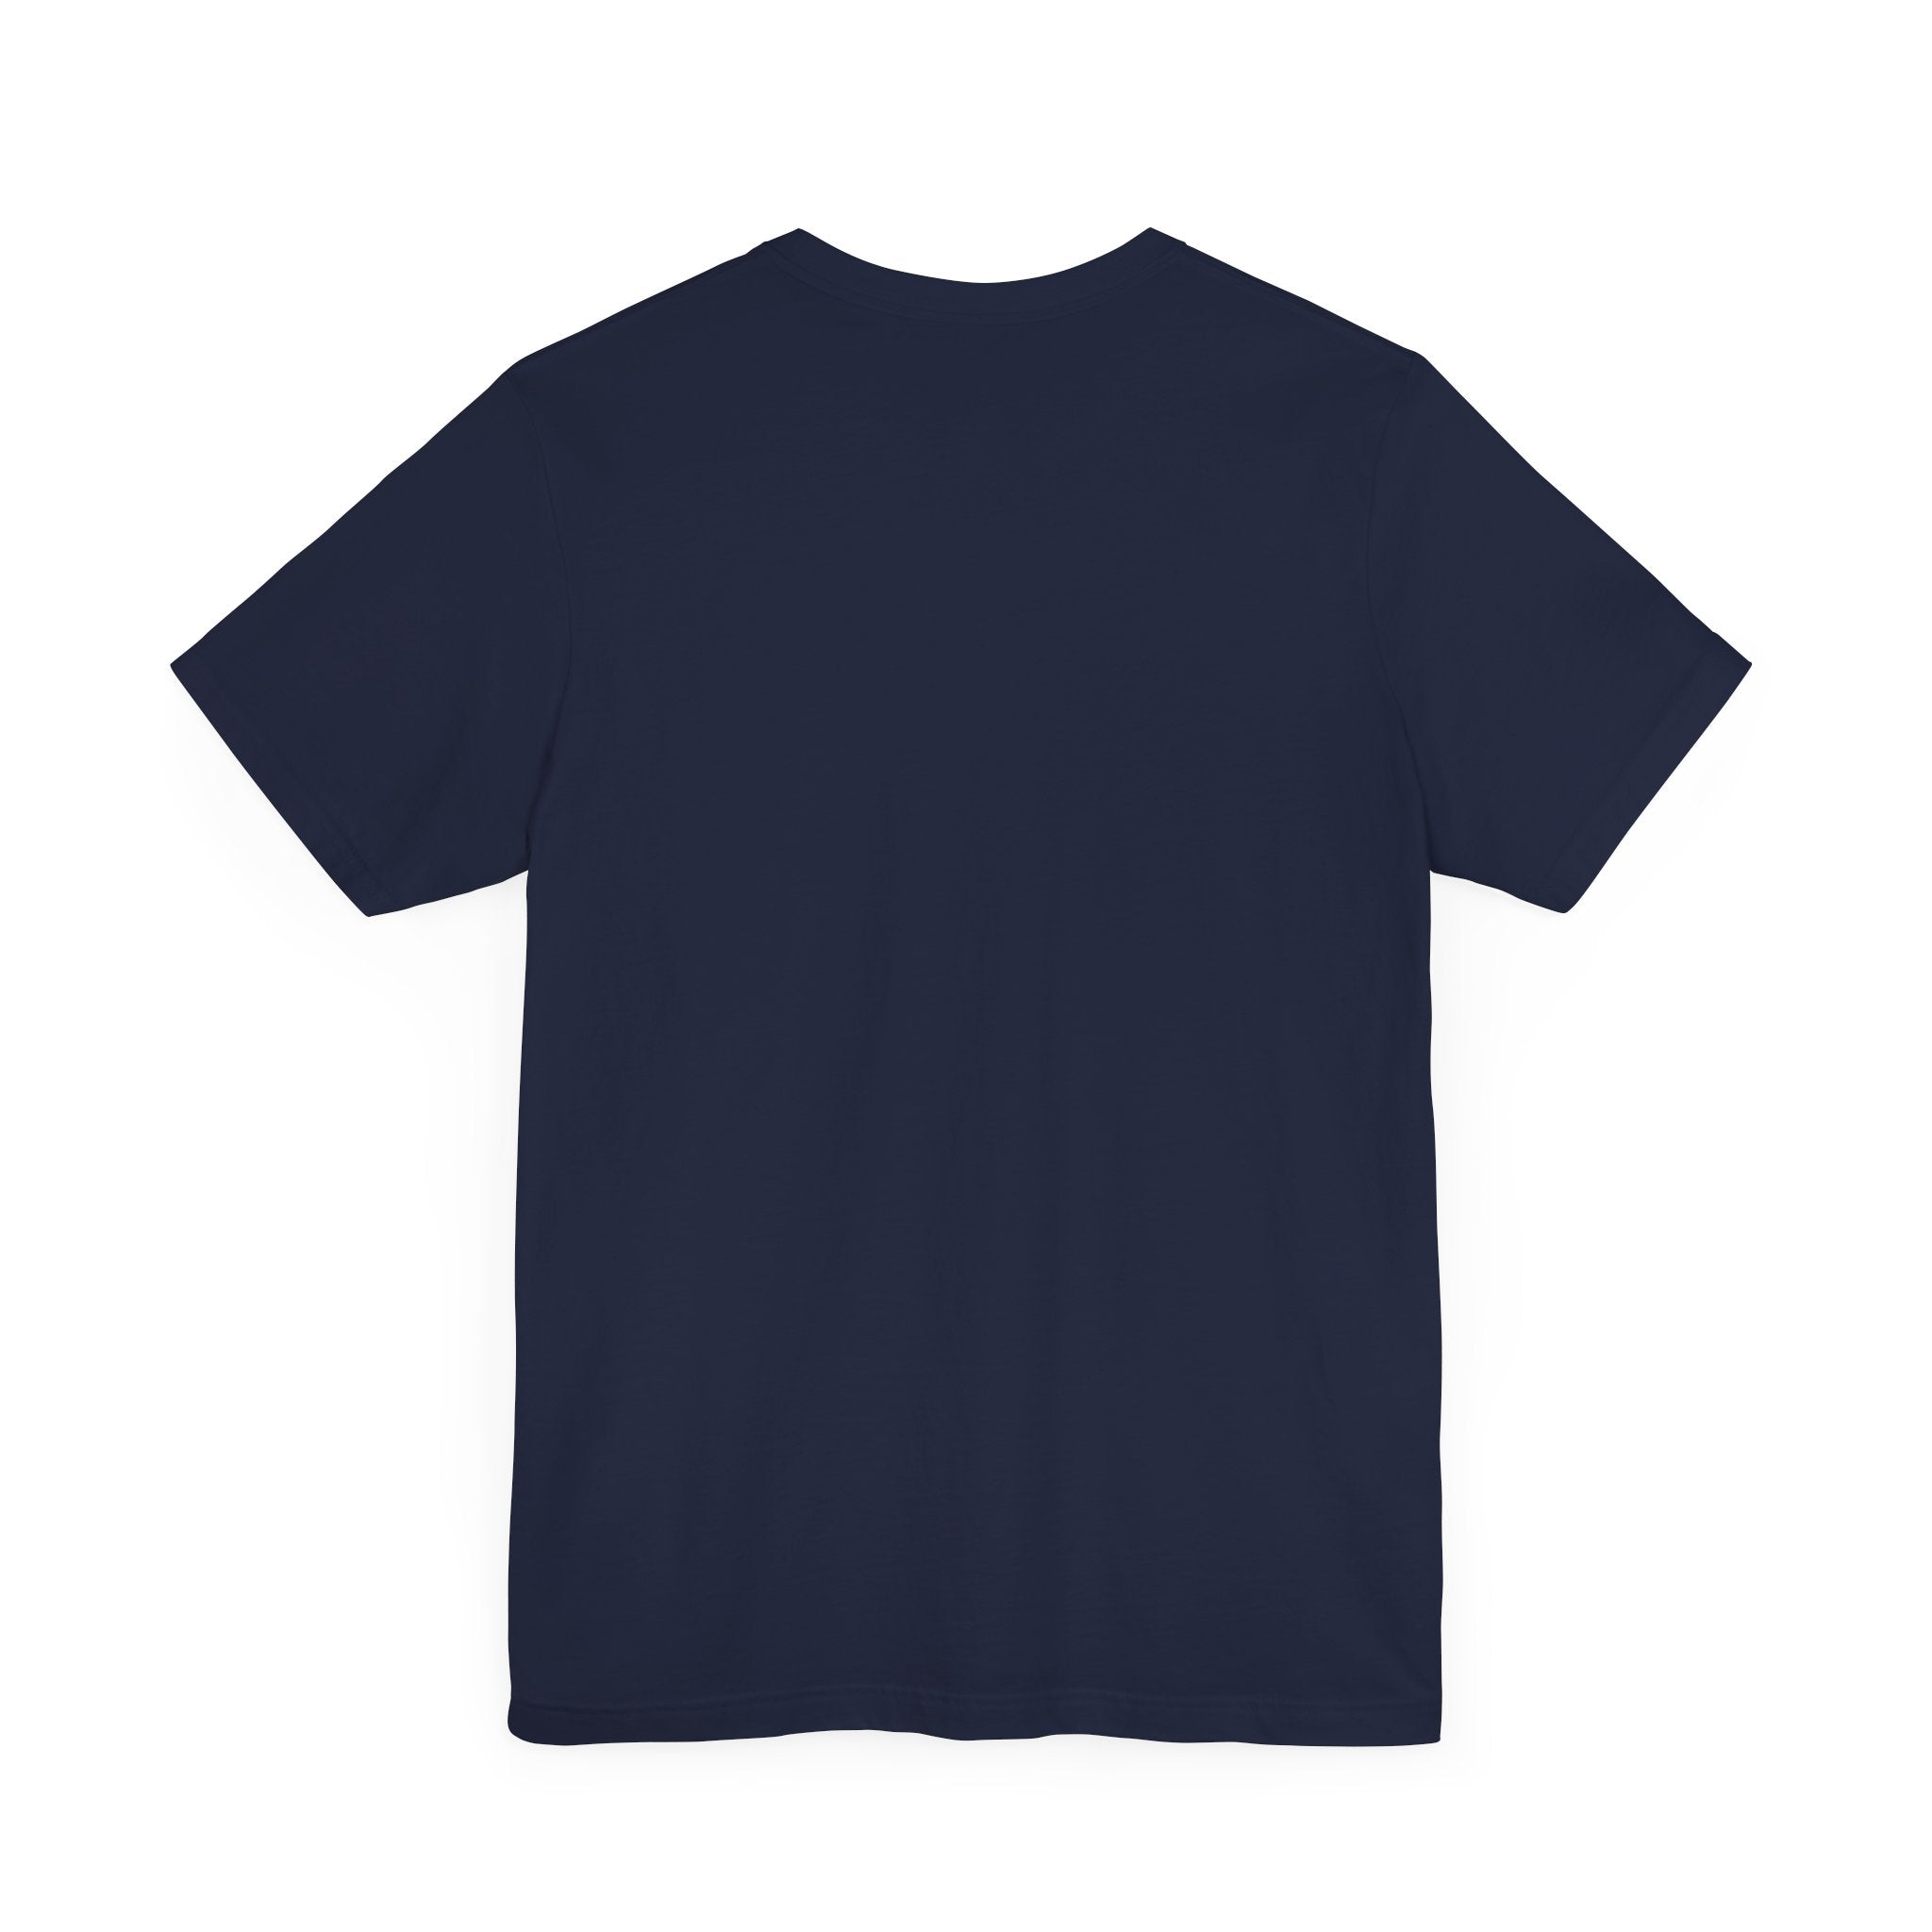 Back view of a plain, dark navy blue C-Ho-Co-La-Te - T-Shirt made from 100% Airlume cotton against a white background.